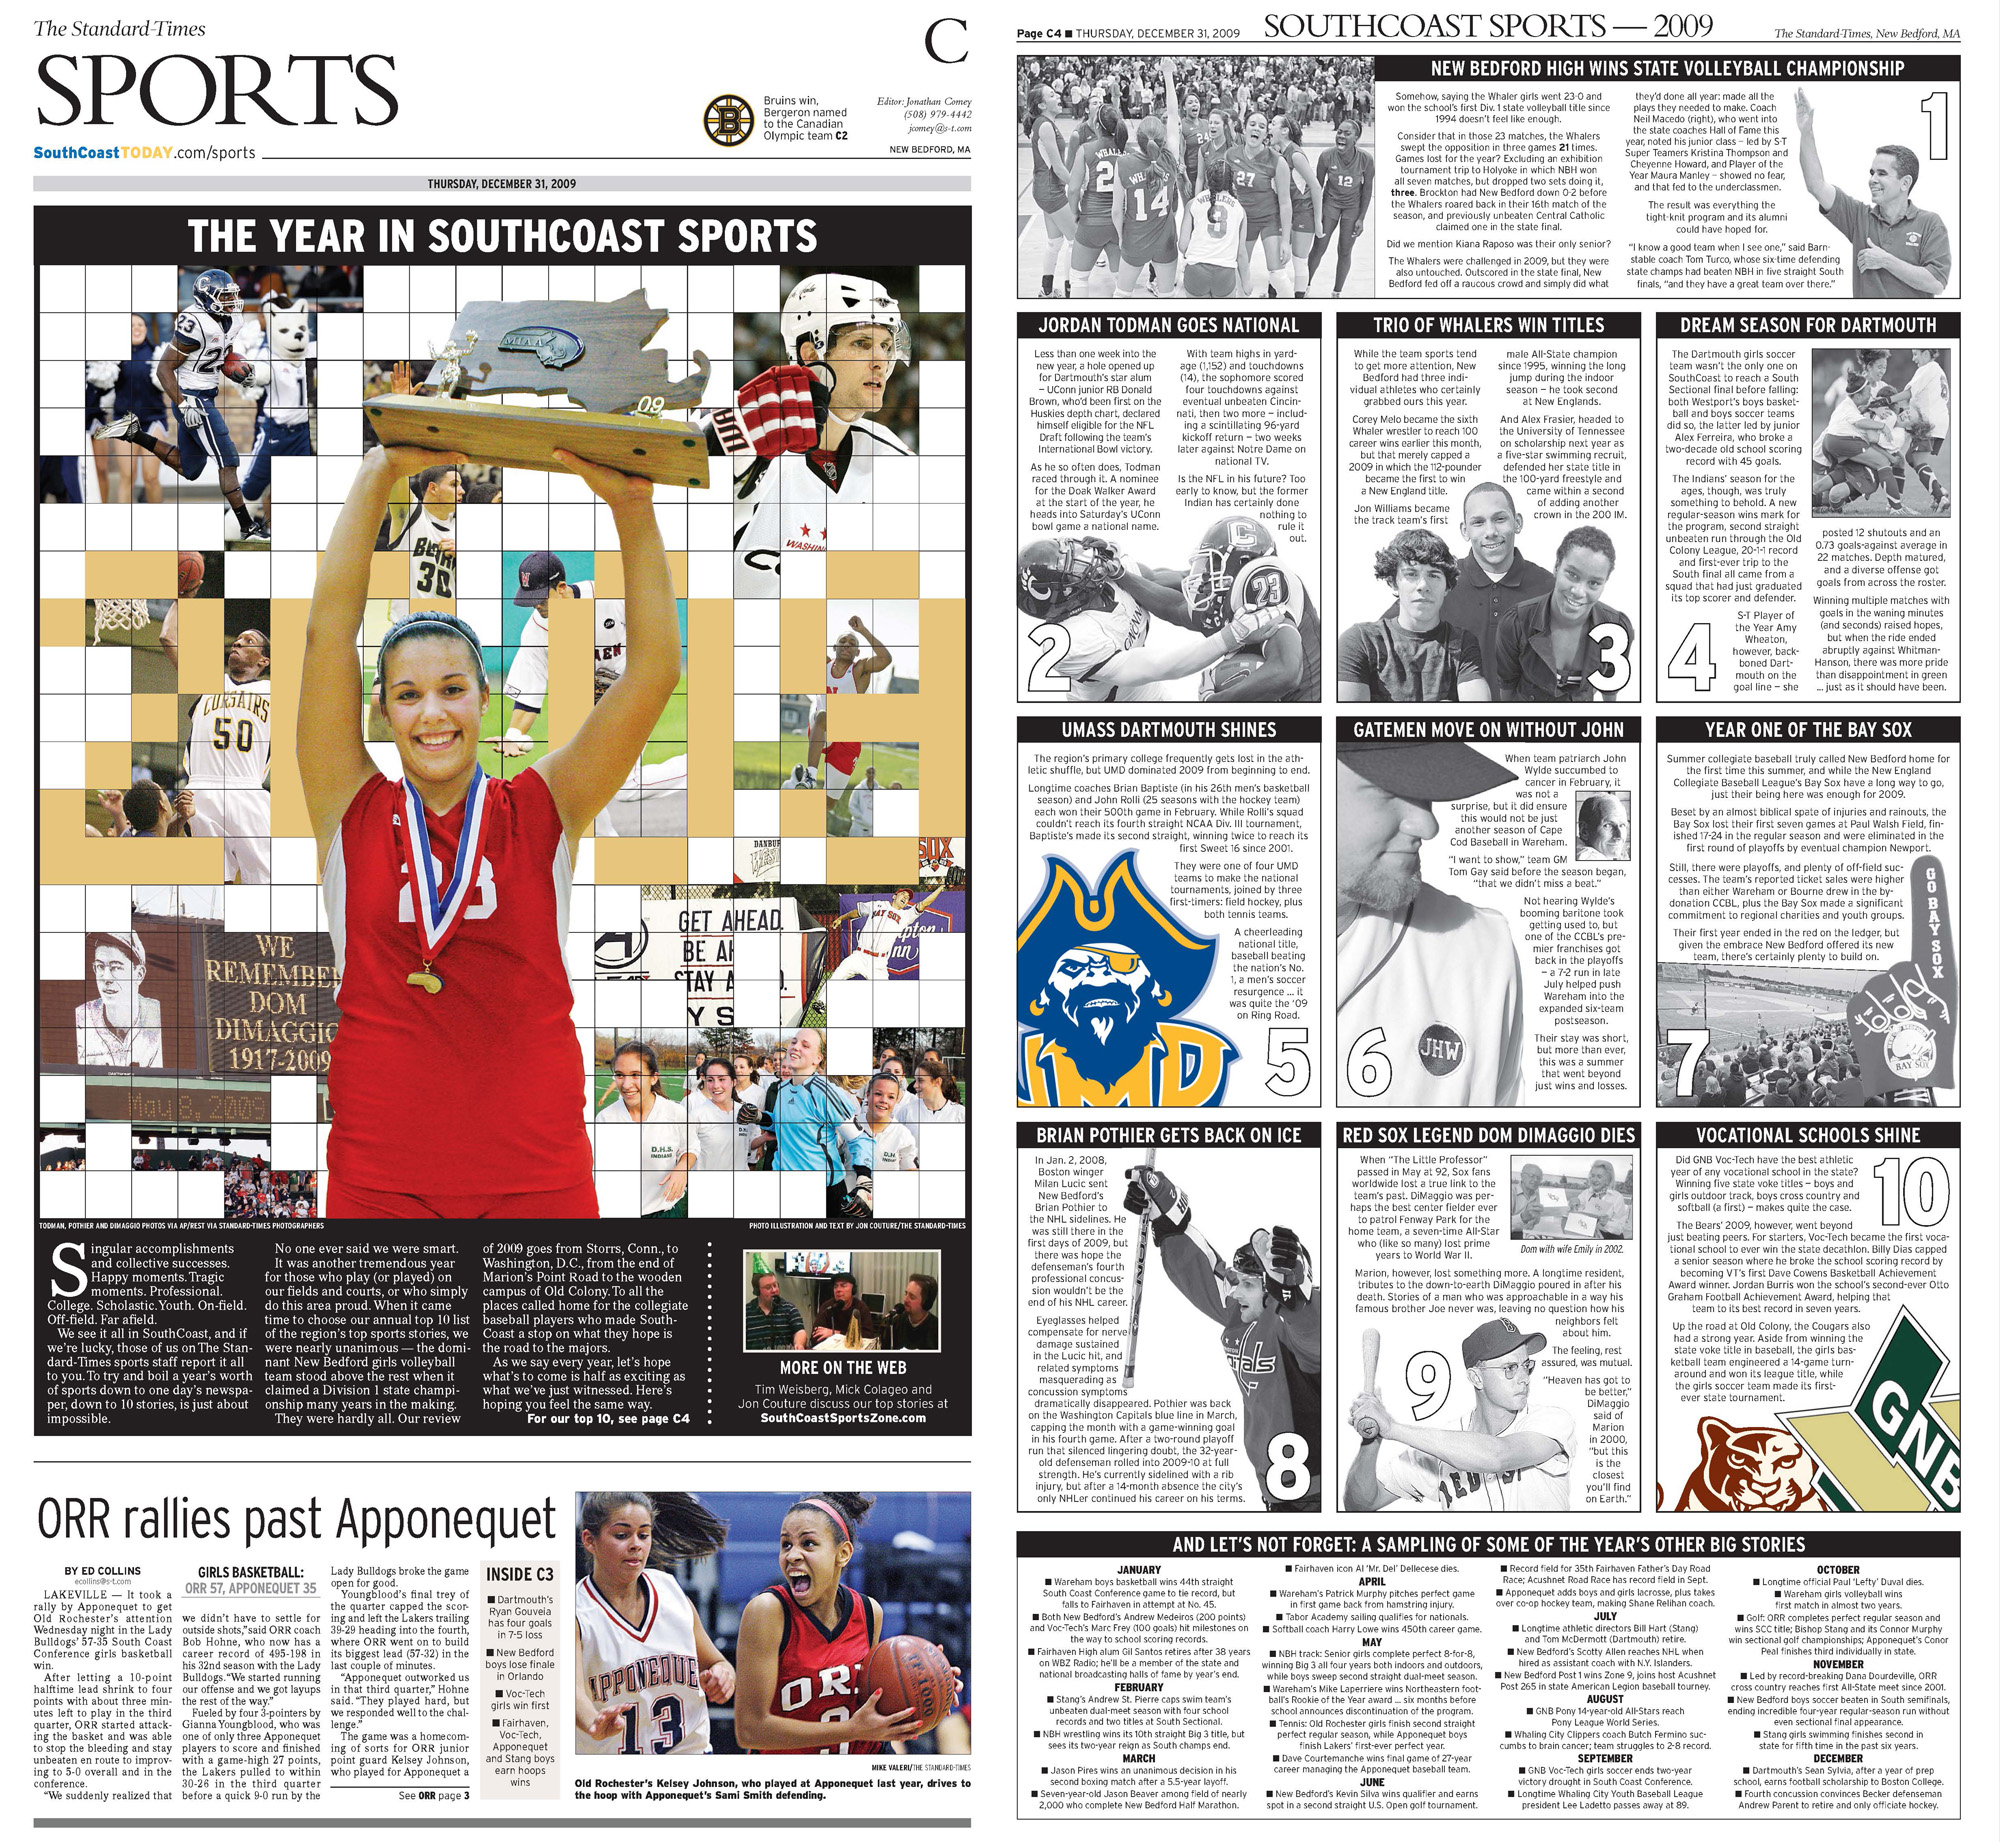 Dec. 31, 2009 -- SouthCoast Sports Year-End Review (Writing & Design)